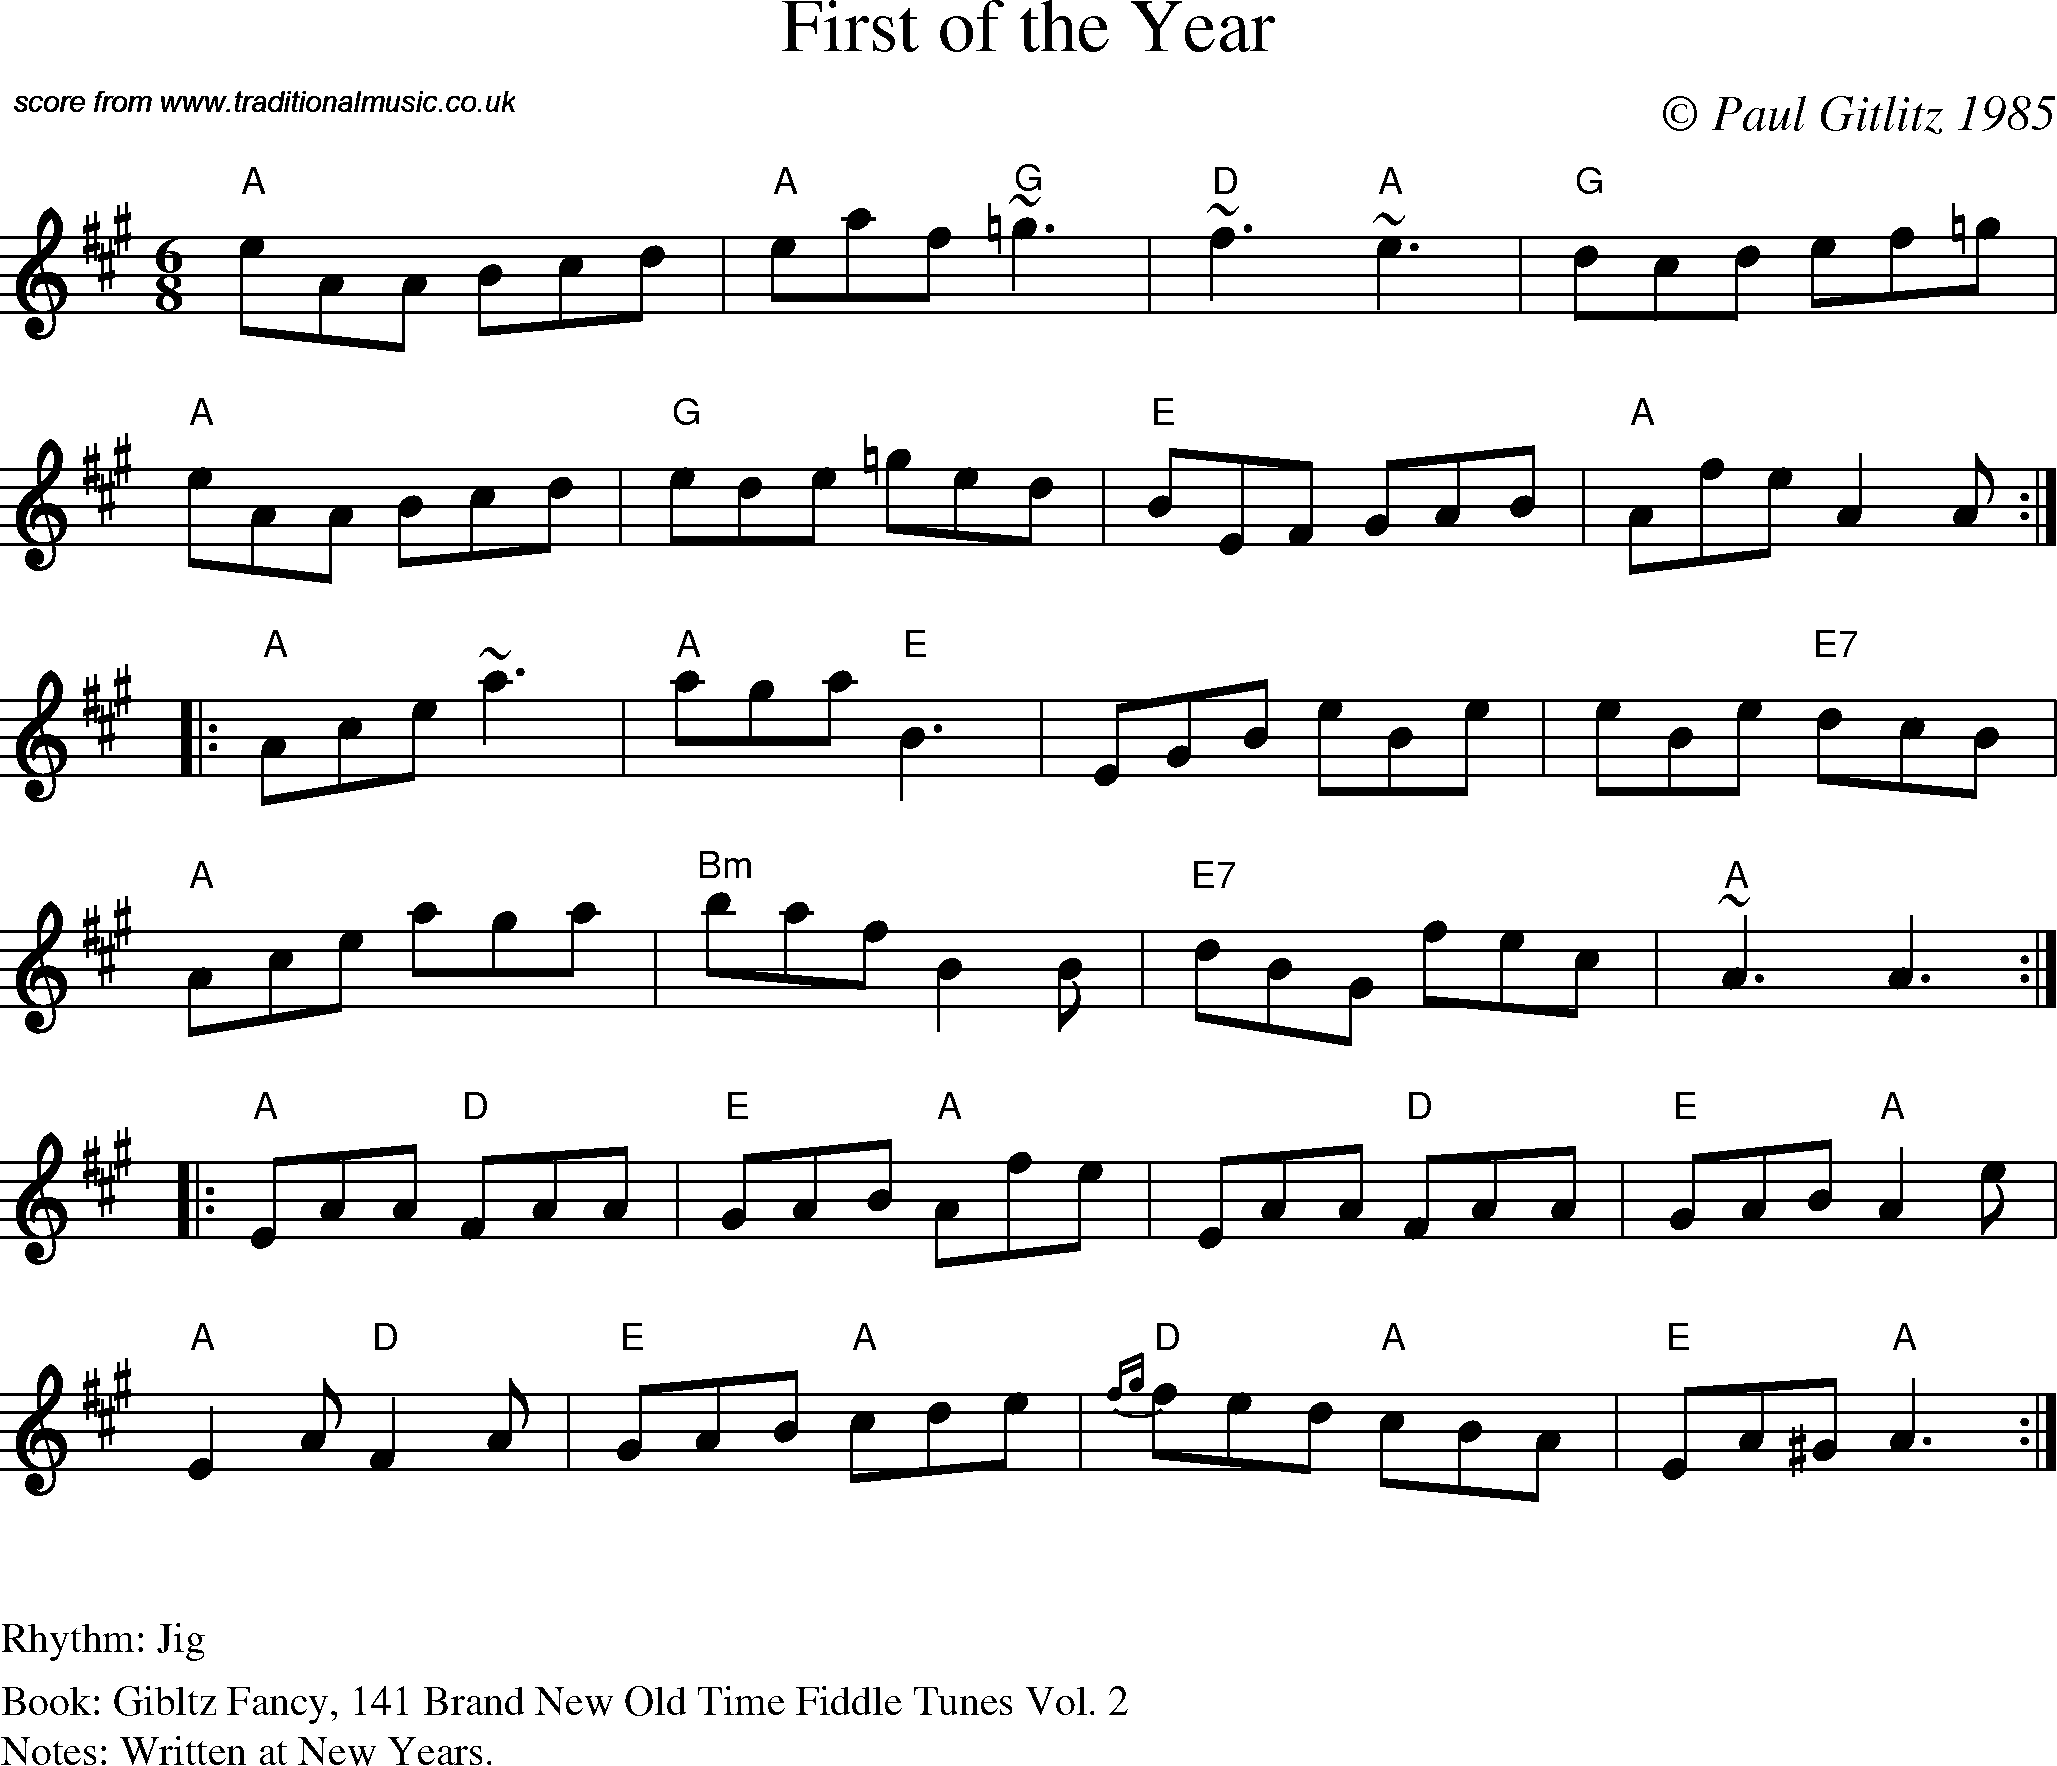 Sheet Music Score for Jig - First of the Year